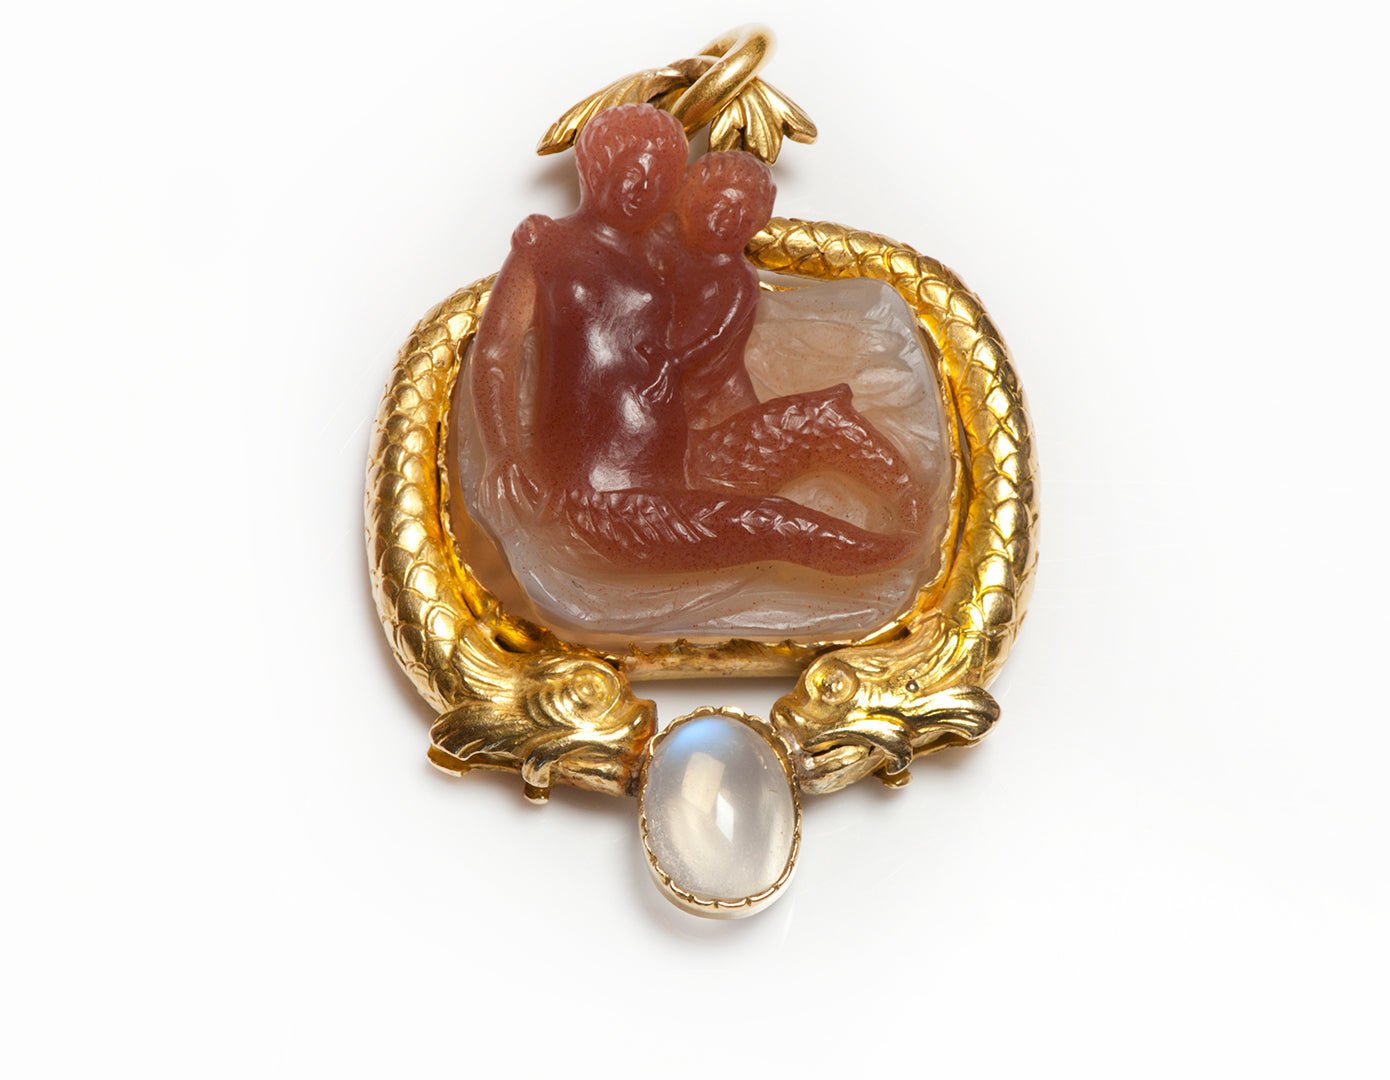 Antique Gold High Relief Carved Agate Mermaid Cameo Figural Griffin Locket Pendant